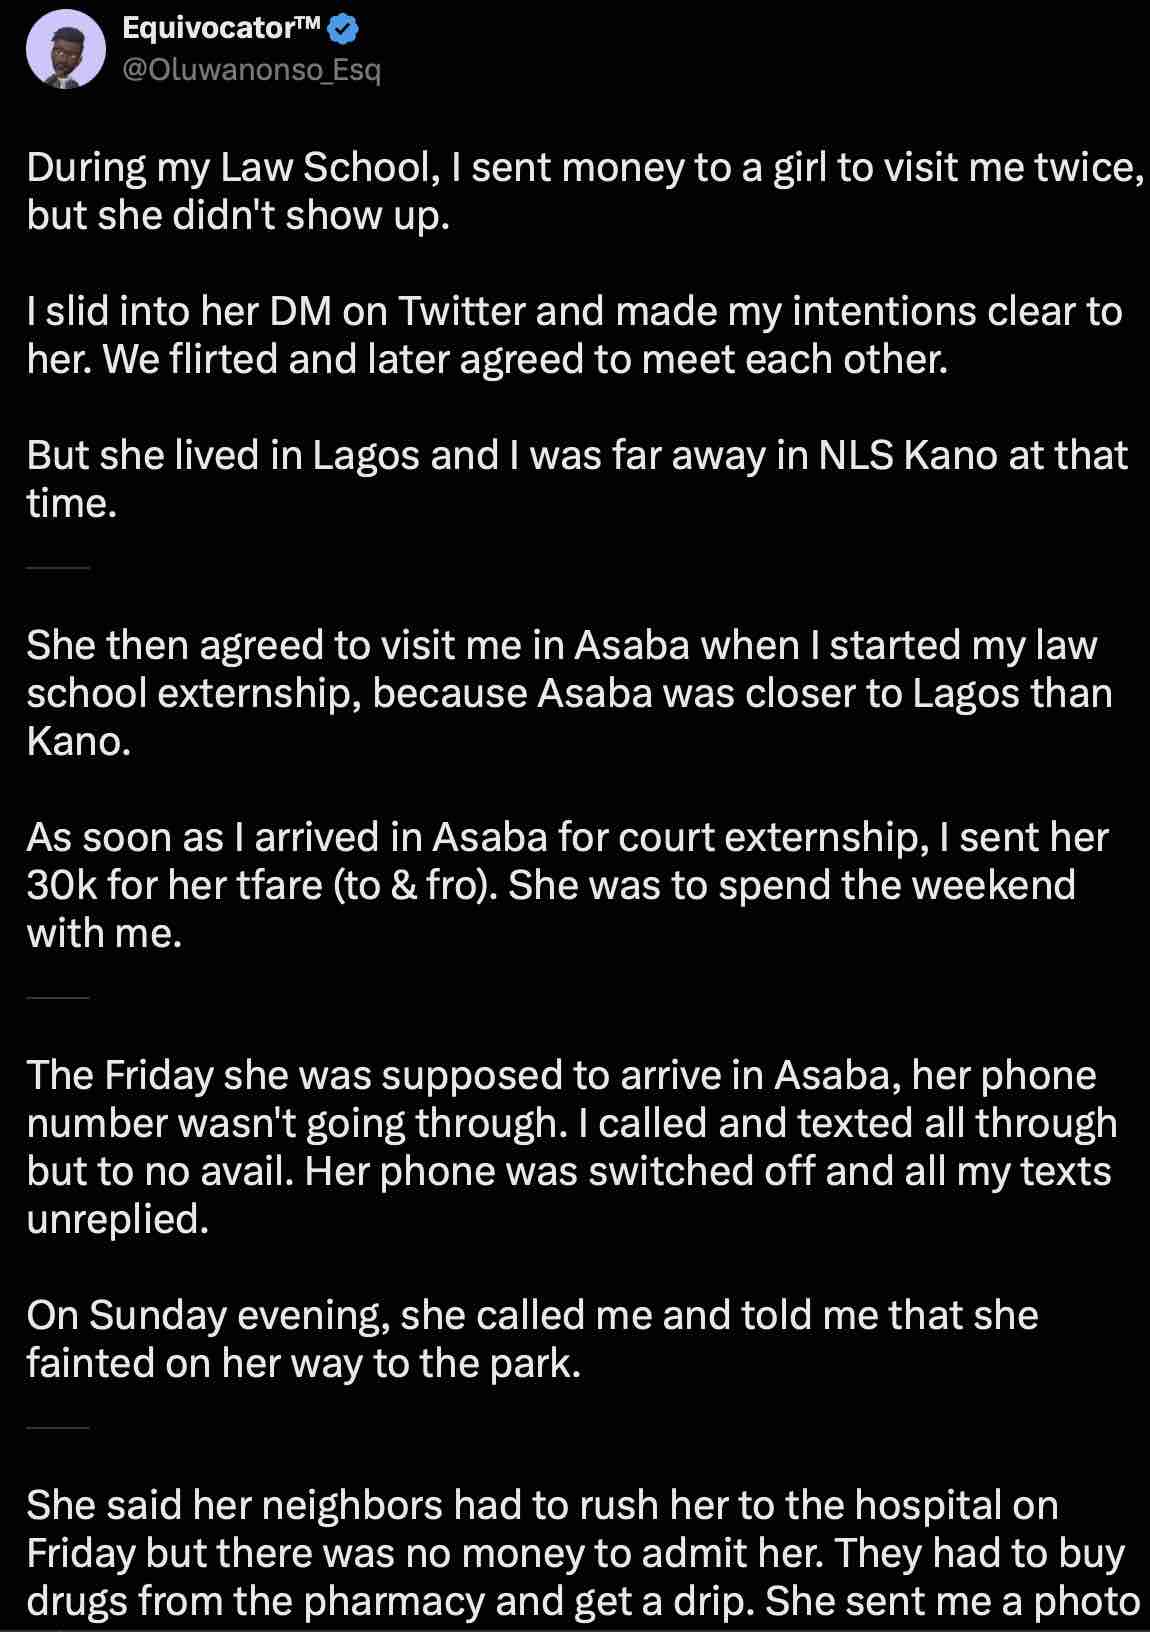 Lawyer recounts revenge on lady who failed to visit after collecting N85K